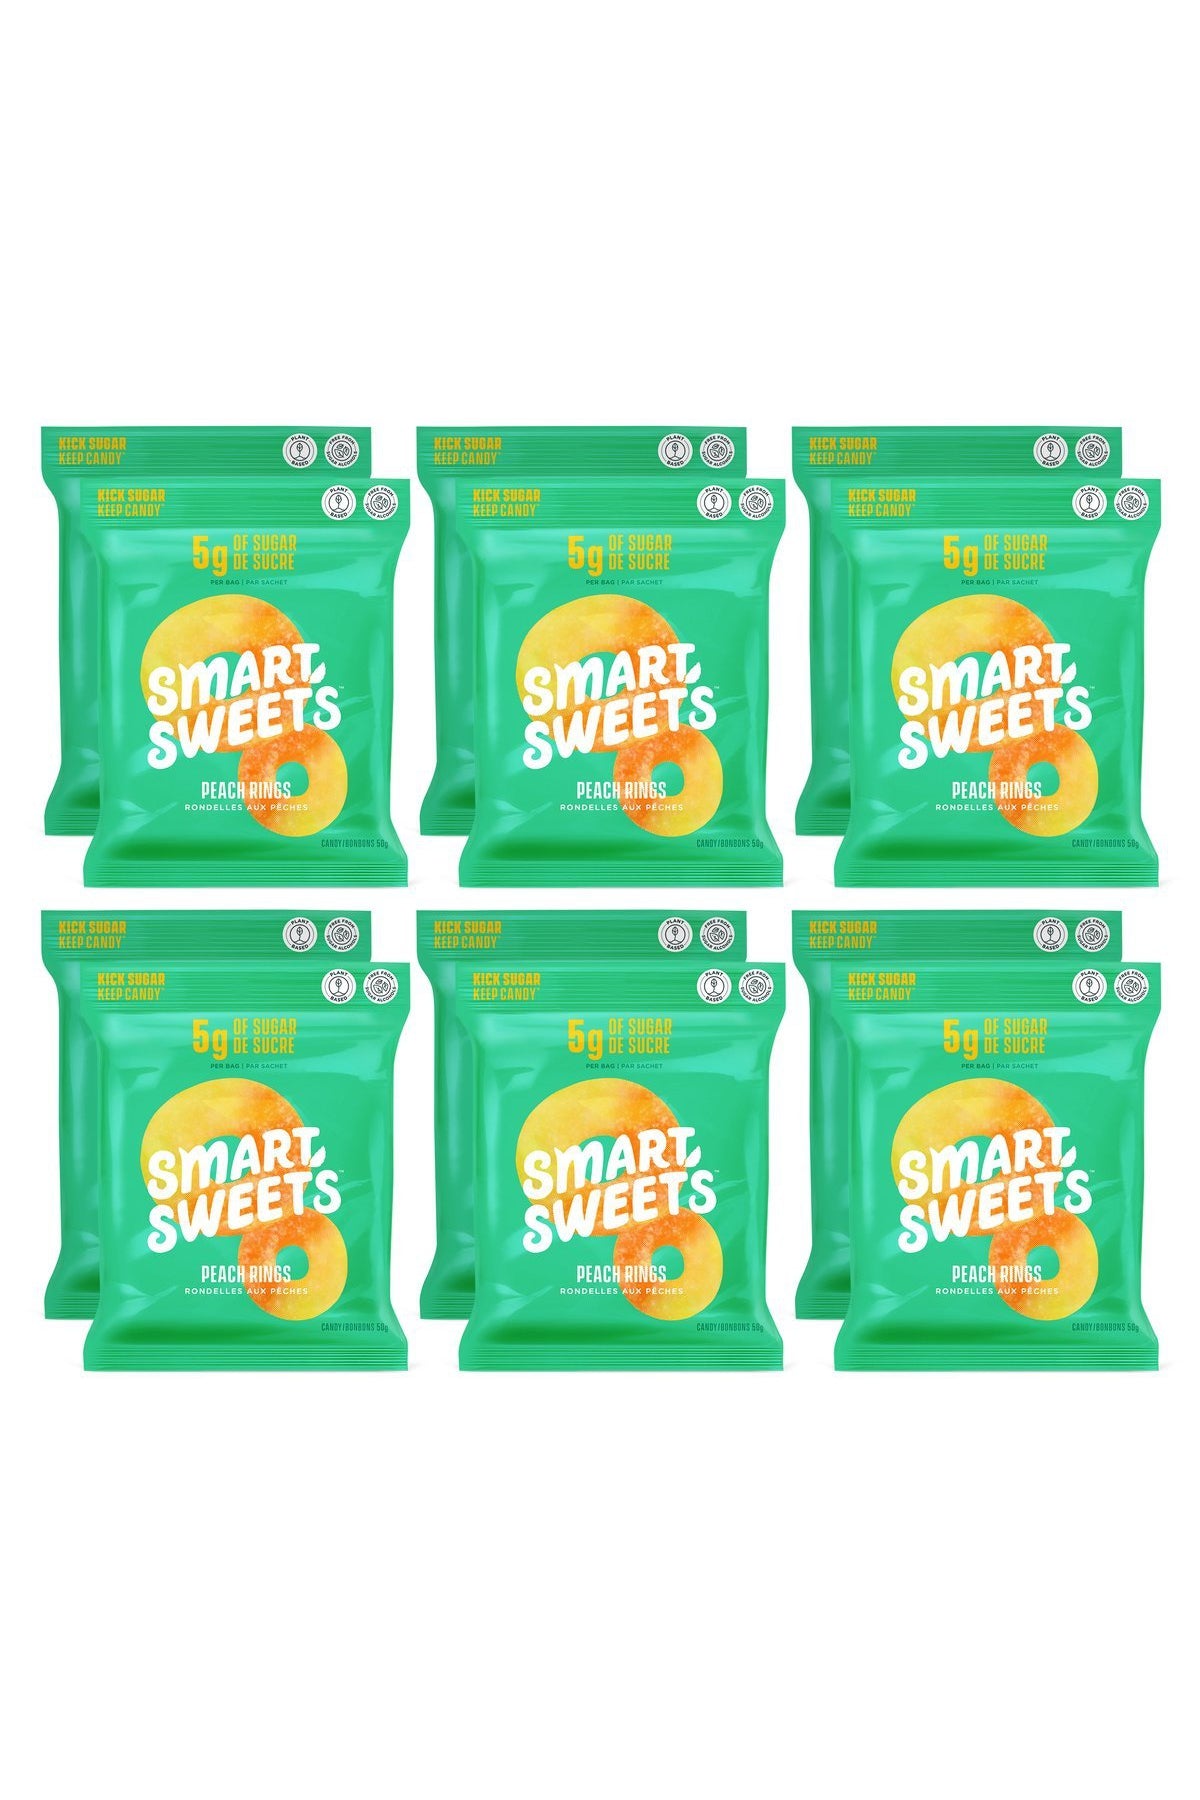 Smart Sweets Peach Rings 50g (Case of 12)